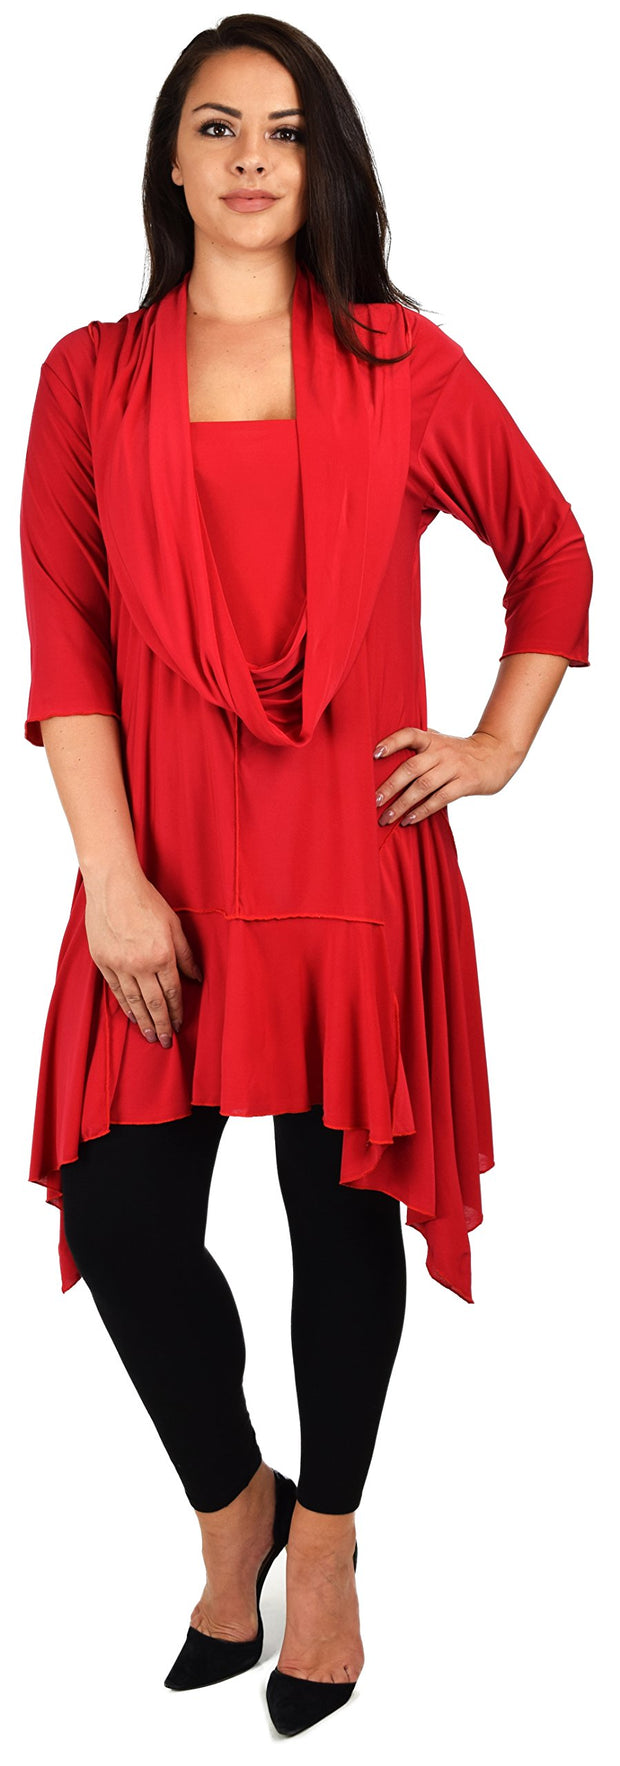 ComfyPlus Crazy Cuts long Lagenlook Plus Size and Regular size Tunic Dress with Mock Front Scarf. Free Shipping Limited Time